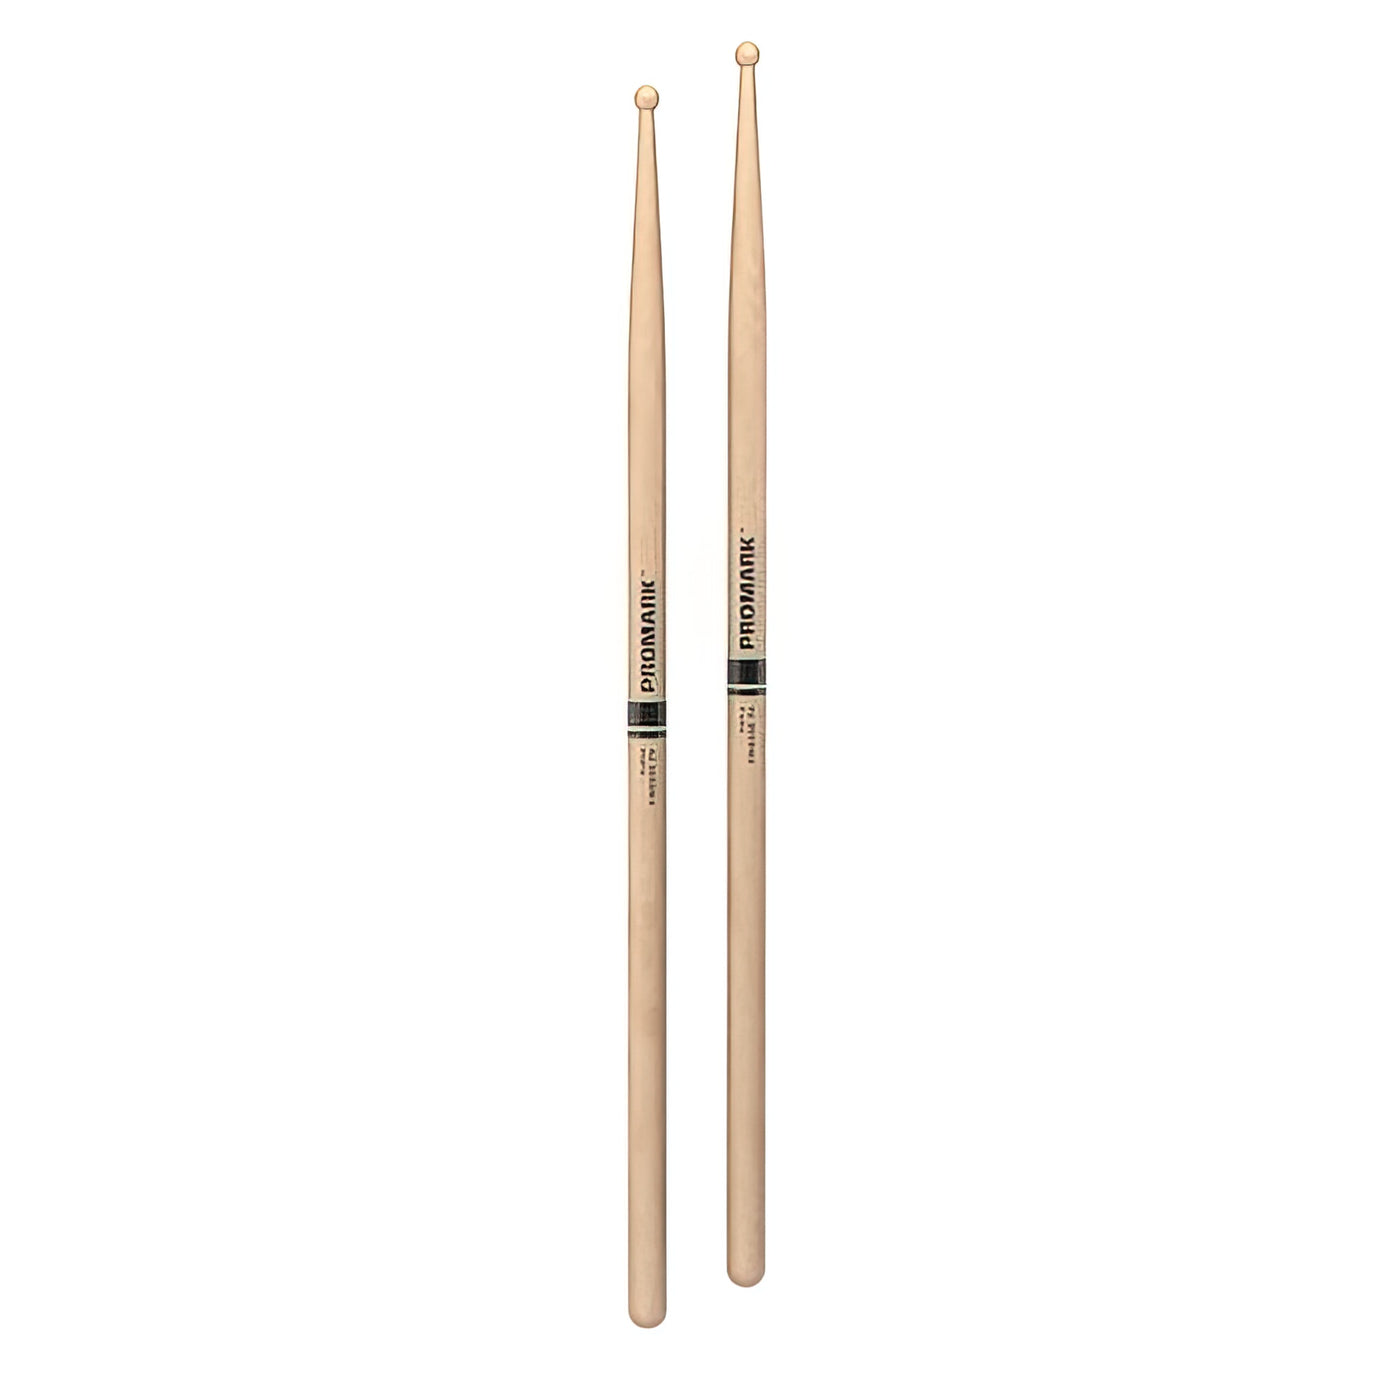 ProMark Finesse 7A Maple Drumstick, Small Round Wood Tip (RBM535RW)